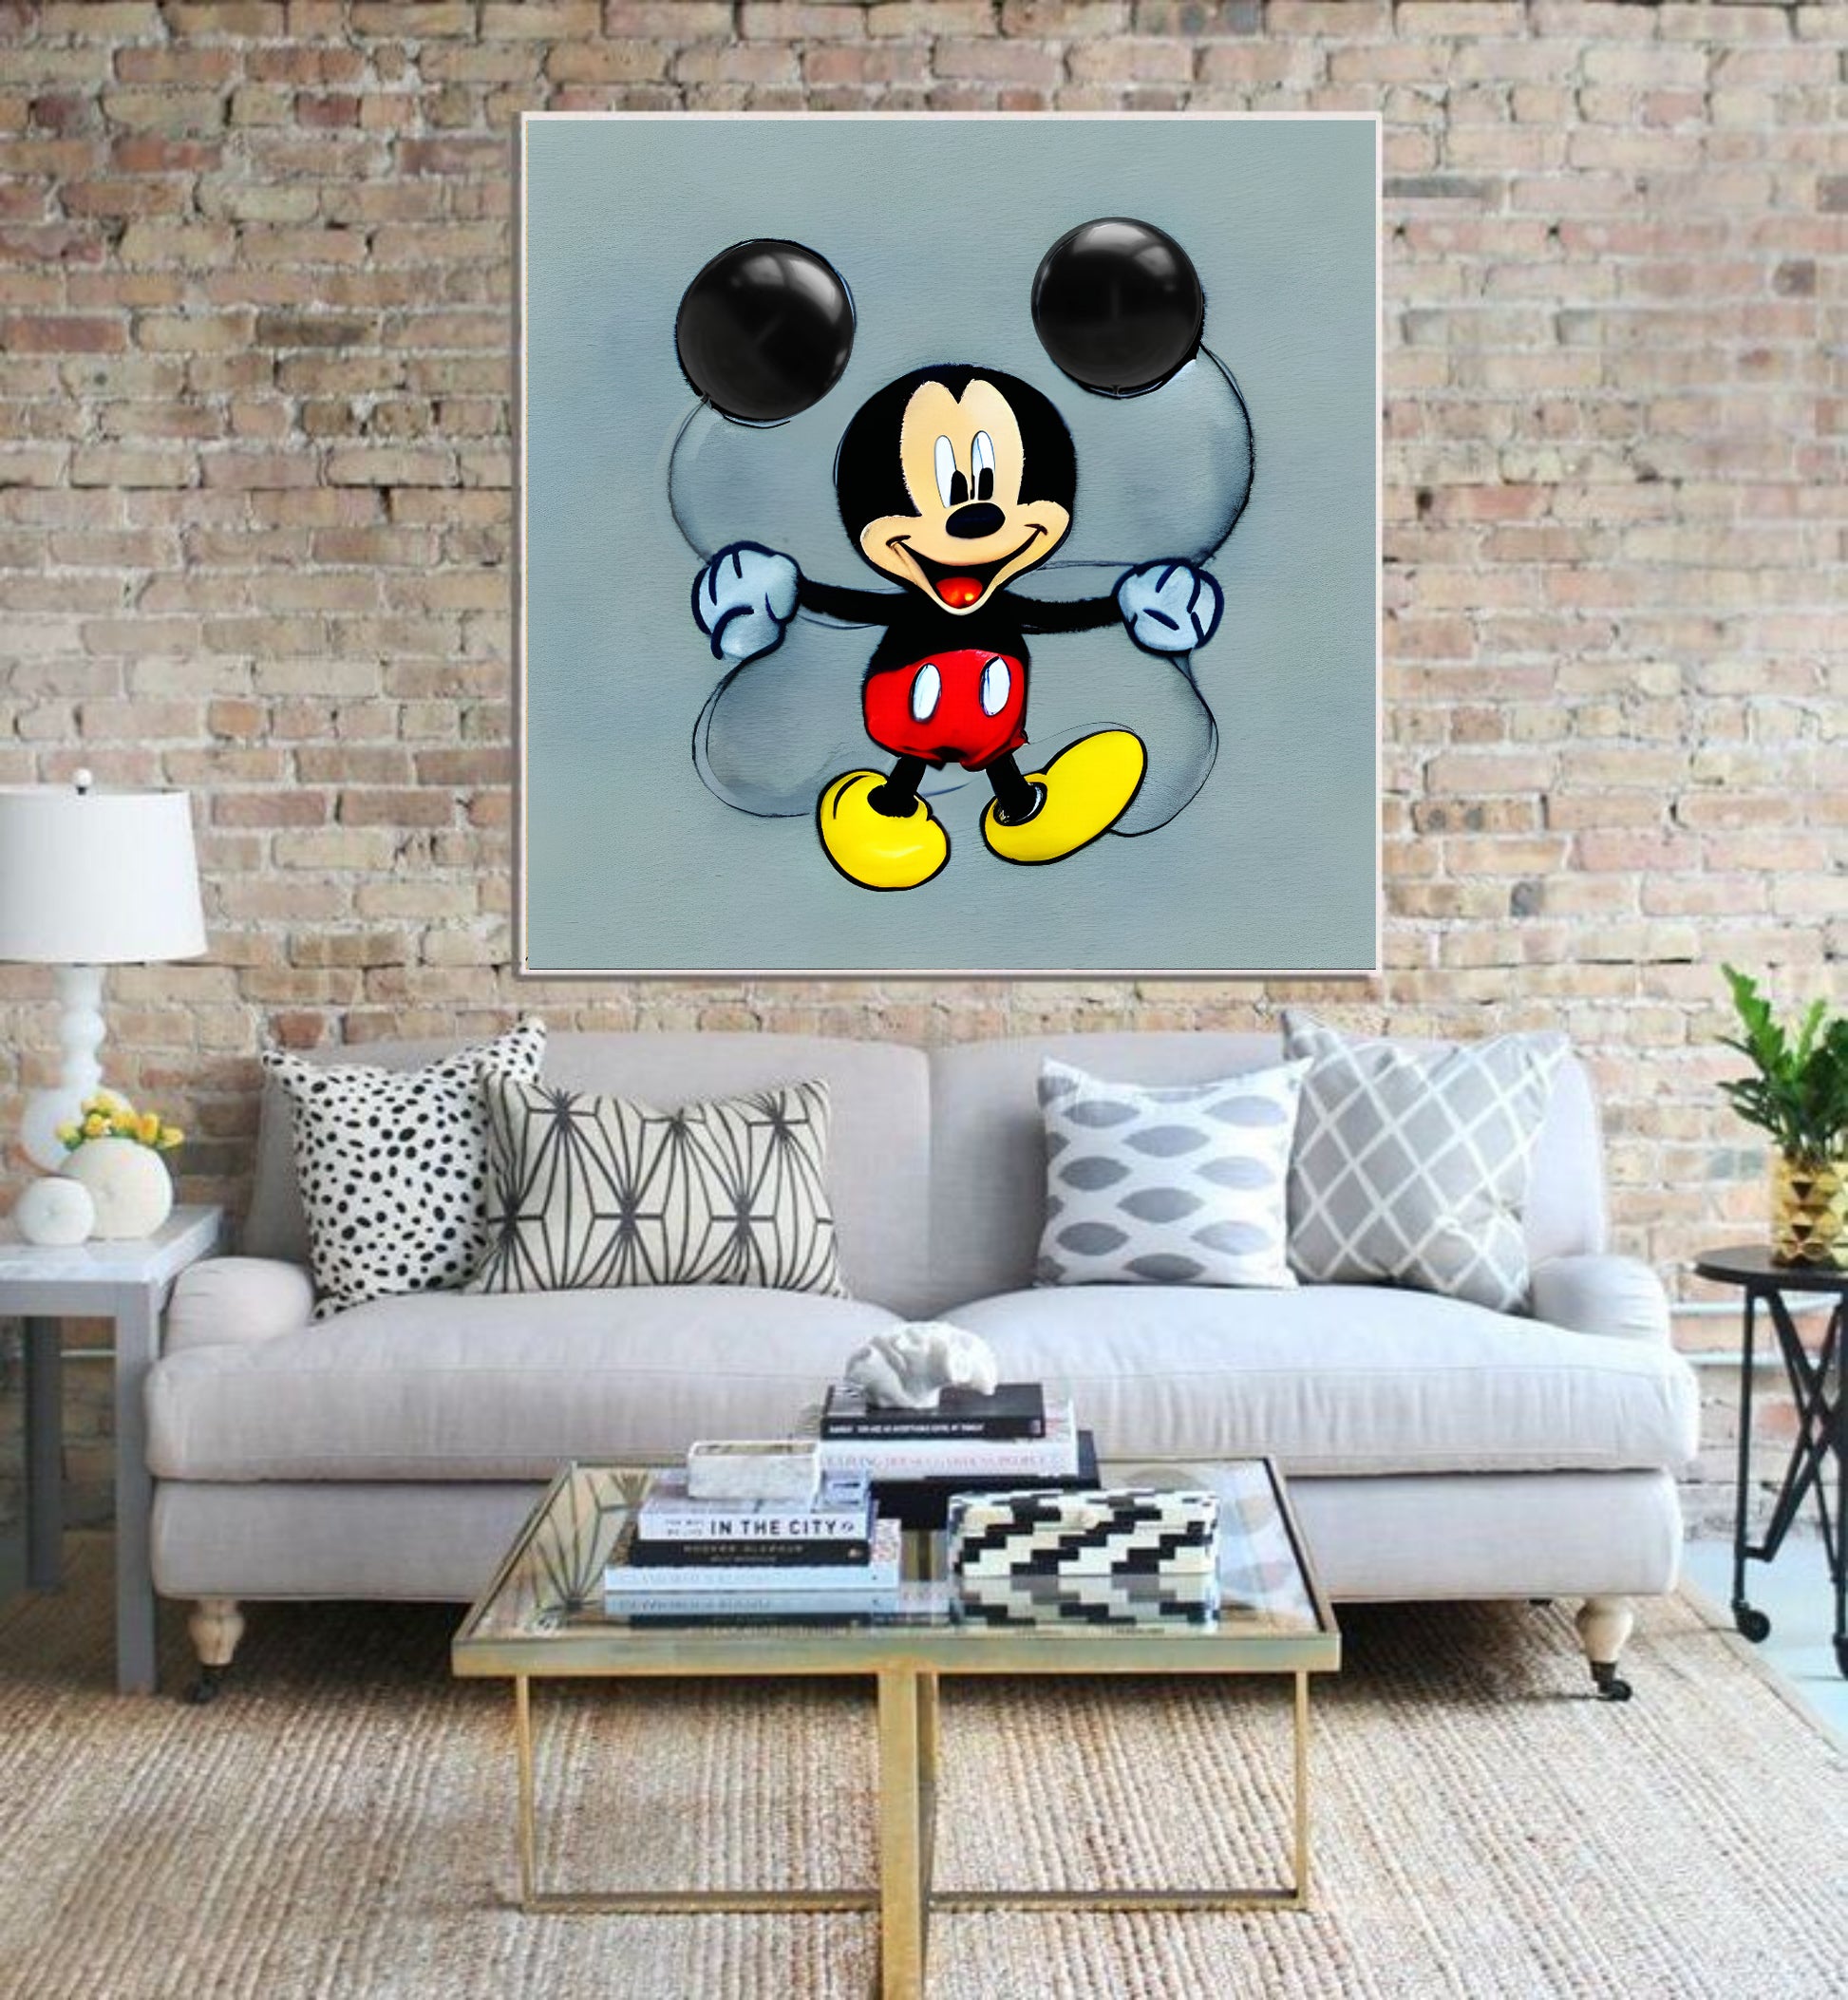 Large Mickey Mouse wall art